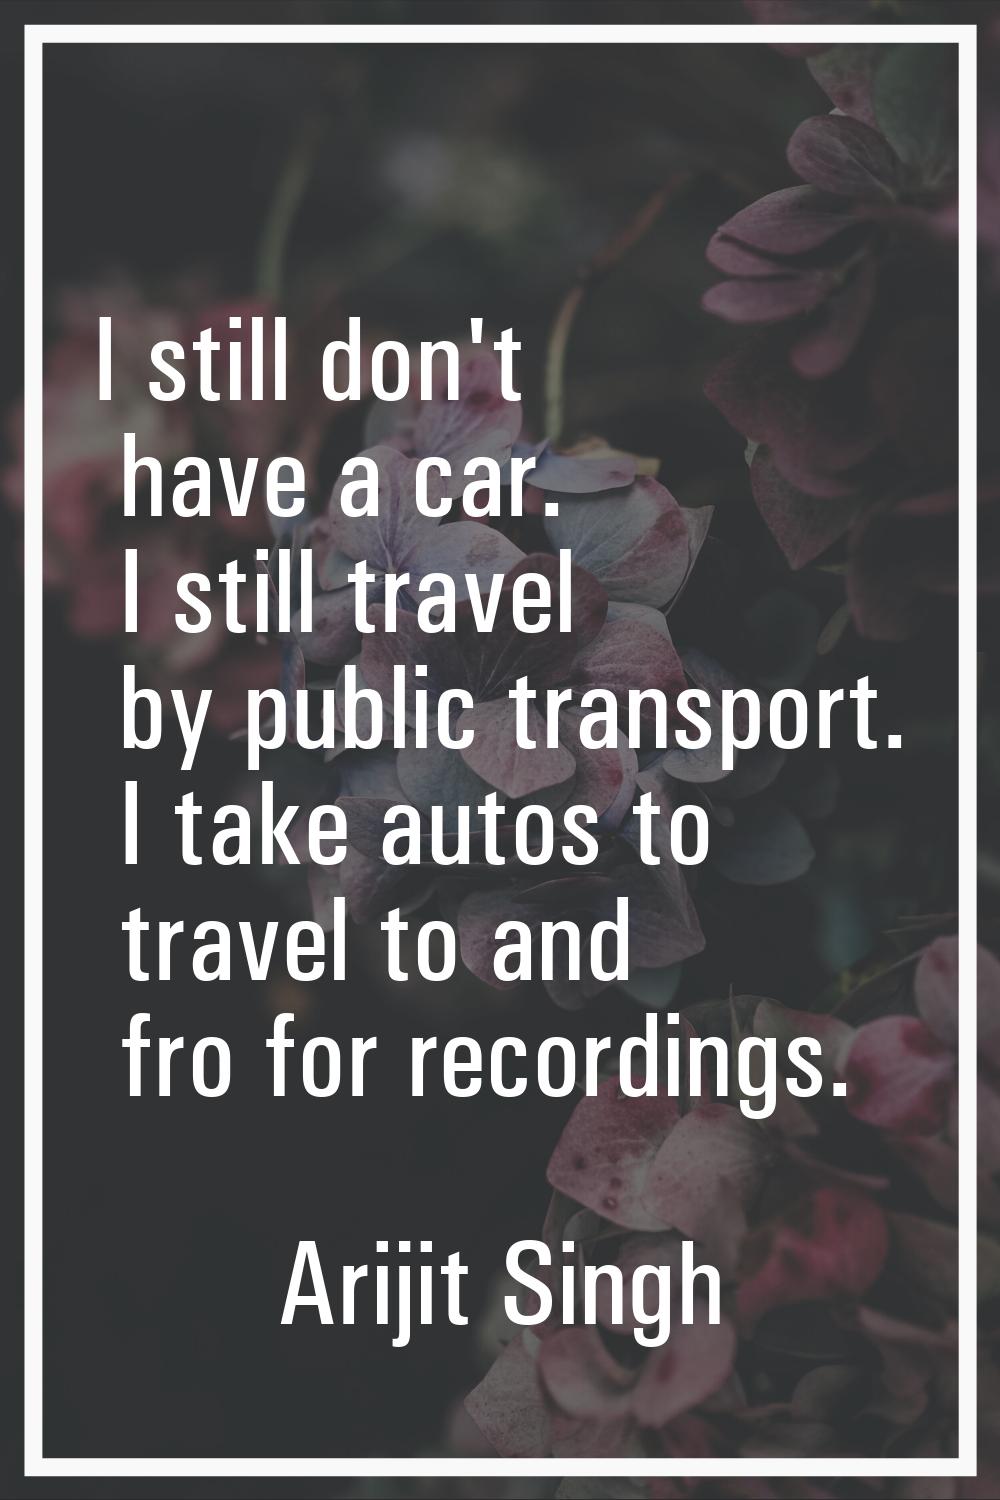 I still don't have a car. I still travel by public transport. I take autos to travel to and fro for